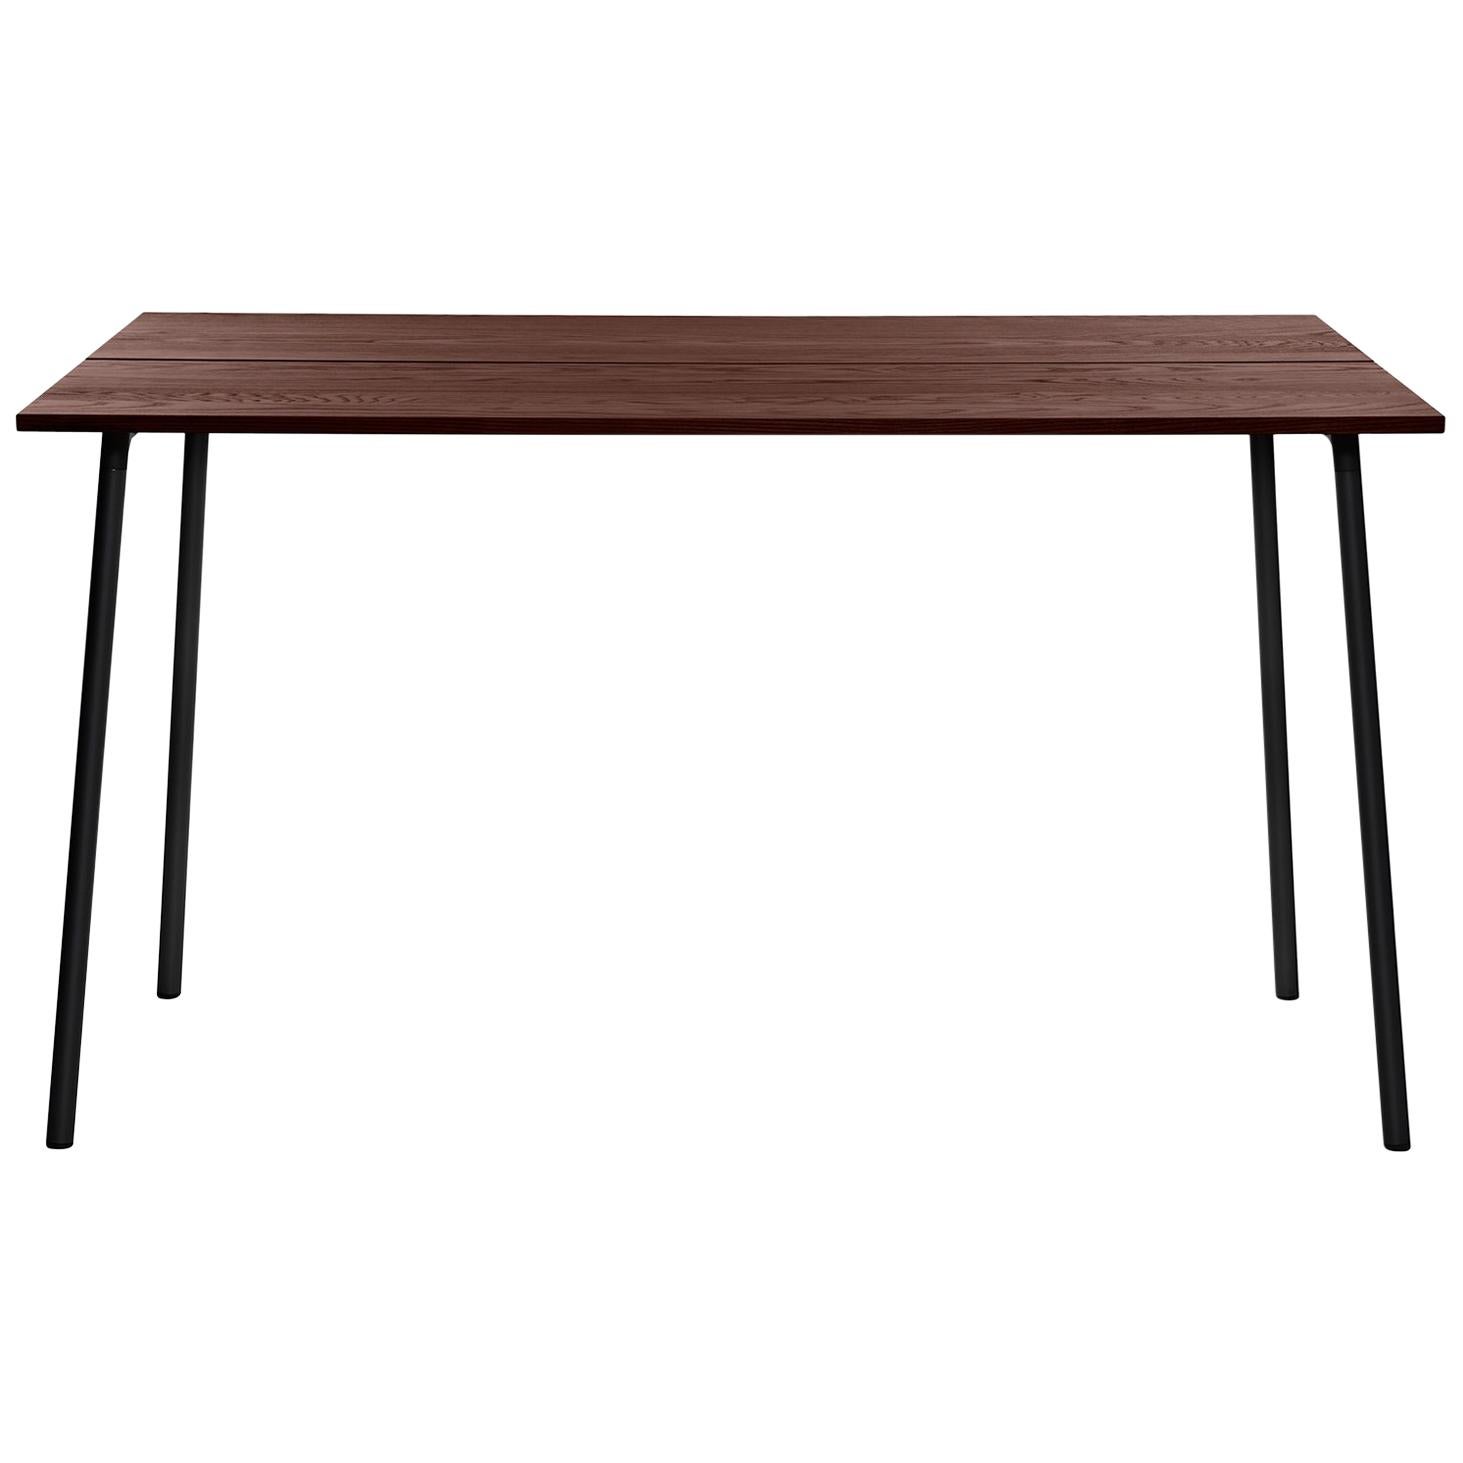 Emeco Run Large High Table in Dark Powder-Coat & Walnut by Sam Hecht + Kim Colin For Sale